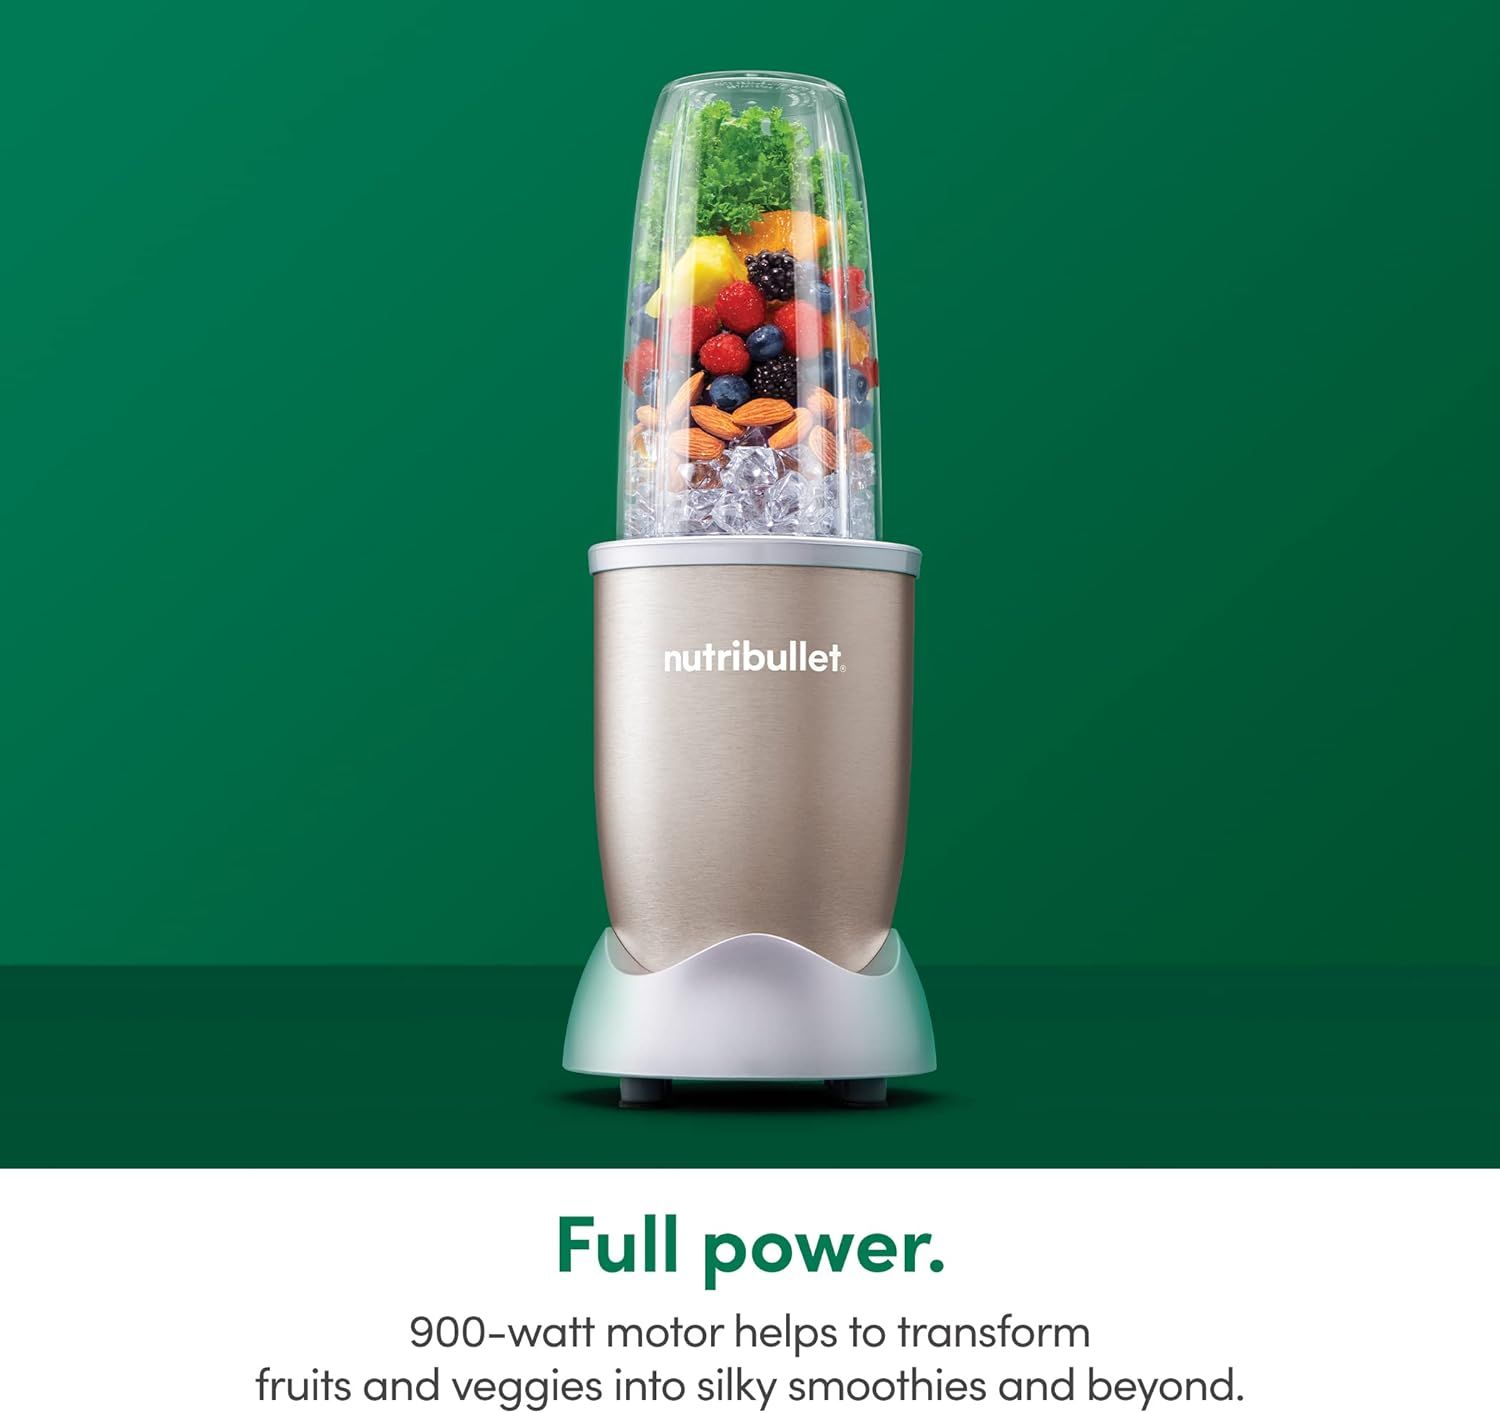 NutriBullet Pro - 13-Piece High-Speed Blender/Mixer System with Hardcover Recipe Book Included (9... | Amazon (US)